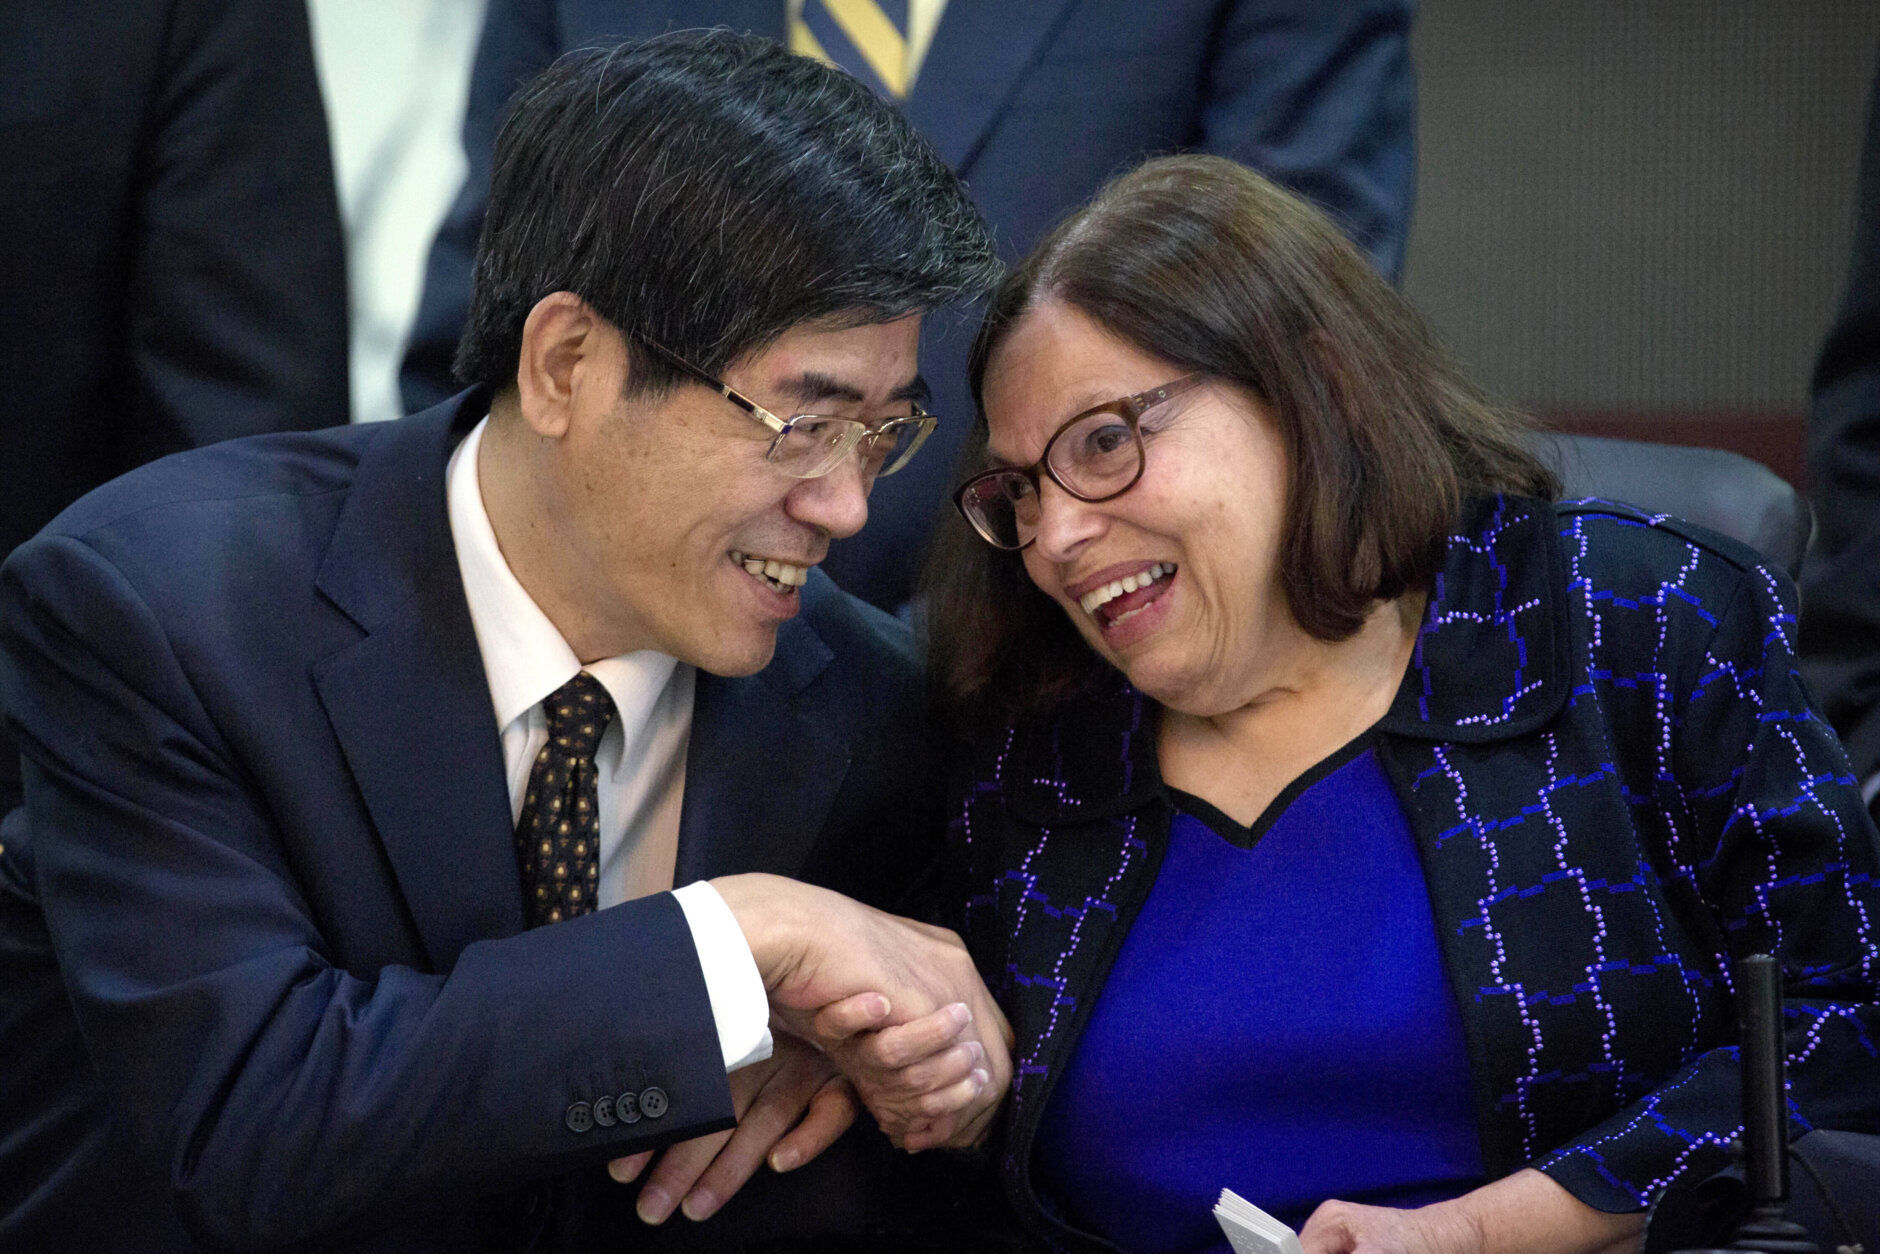 Lu Yong, left, president of the China Disabled Persons' Federation, talks with Judith Heumann, right, Special Advisor for International Disability Rights at the U.S. Department of State, after the opening session of the China-U.S. Coordination Meeting on Disability in Beijing, Tuesday, April 12, 2016. (AP Photo/Mark Schiefelbein, Pool)